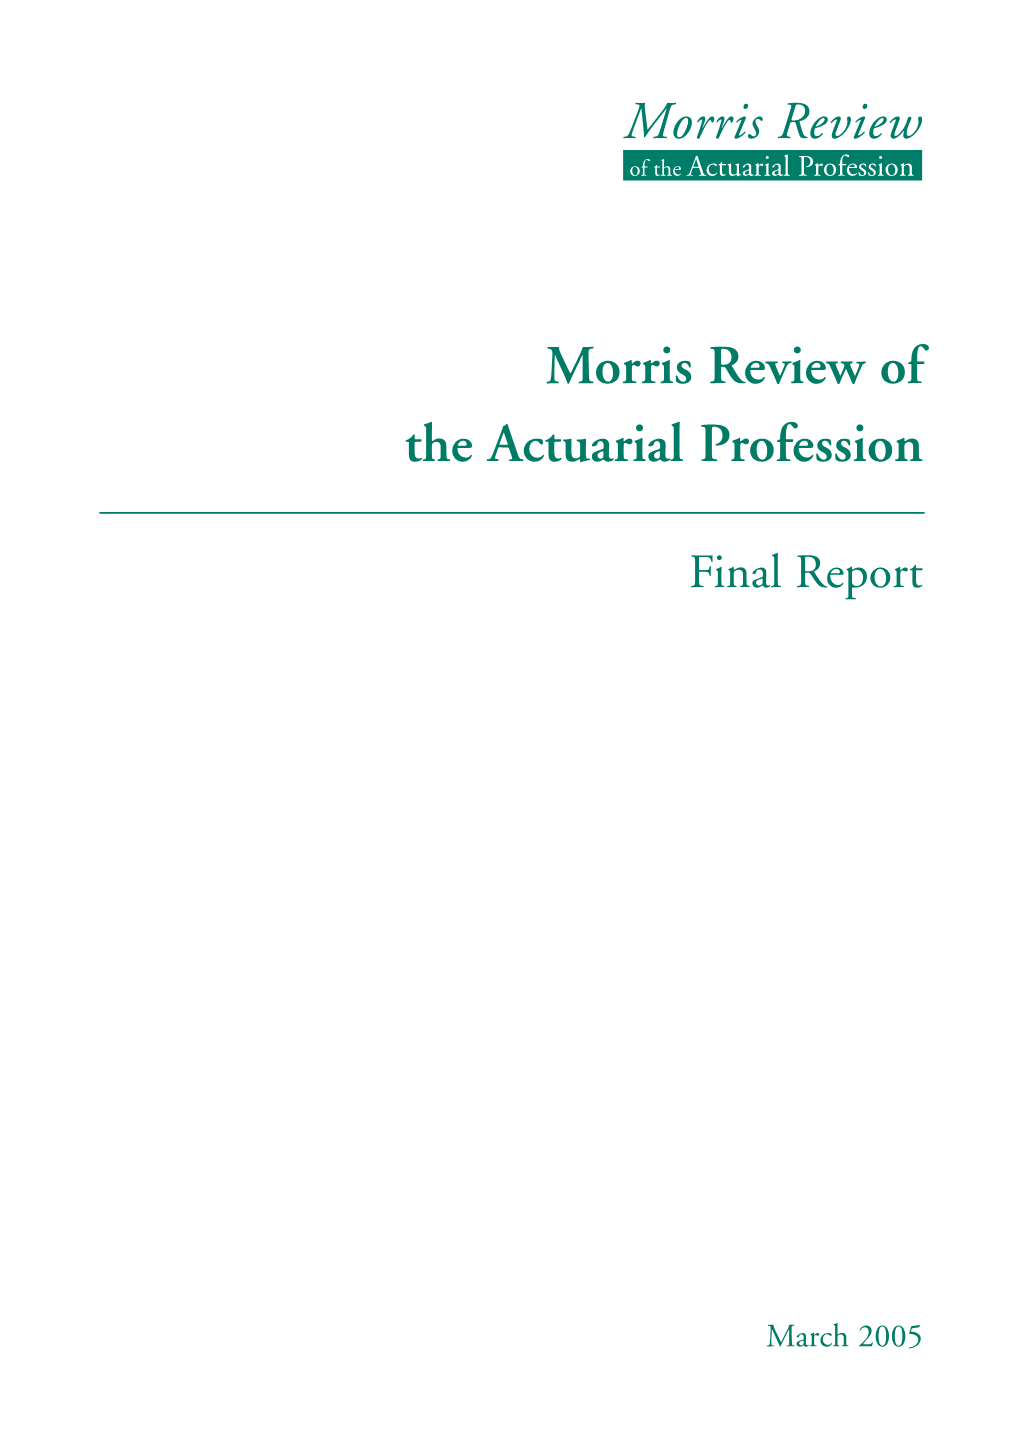 Morris Review of the Actuarial Profession